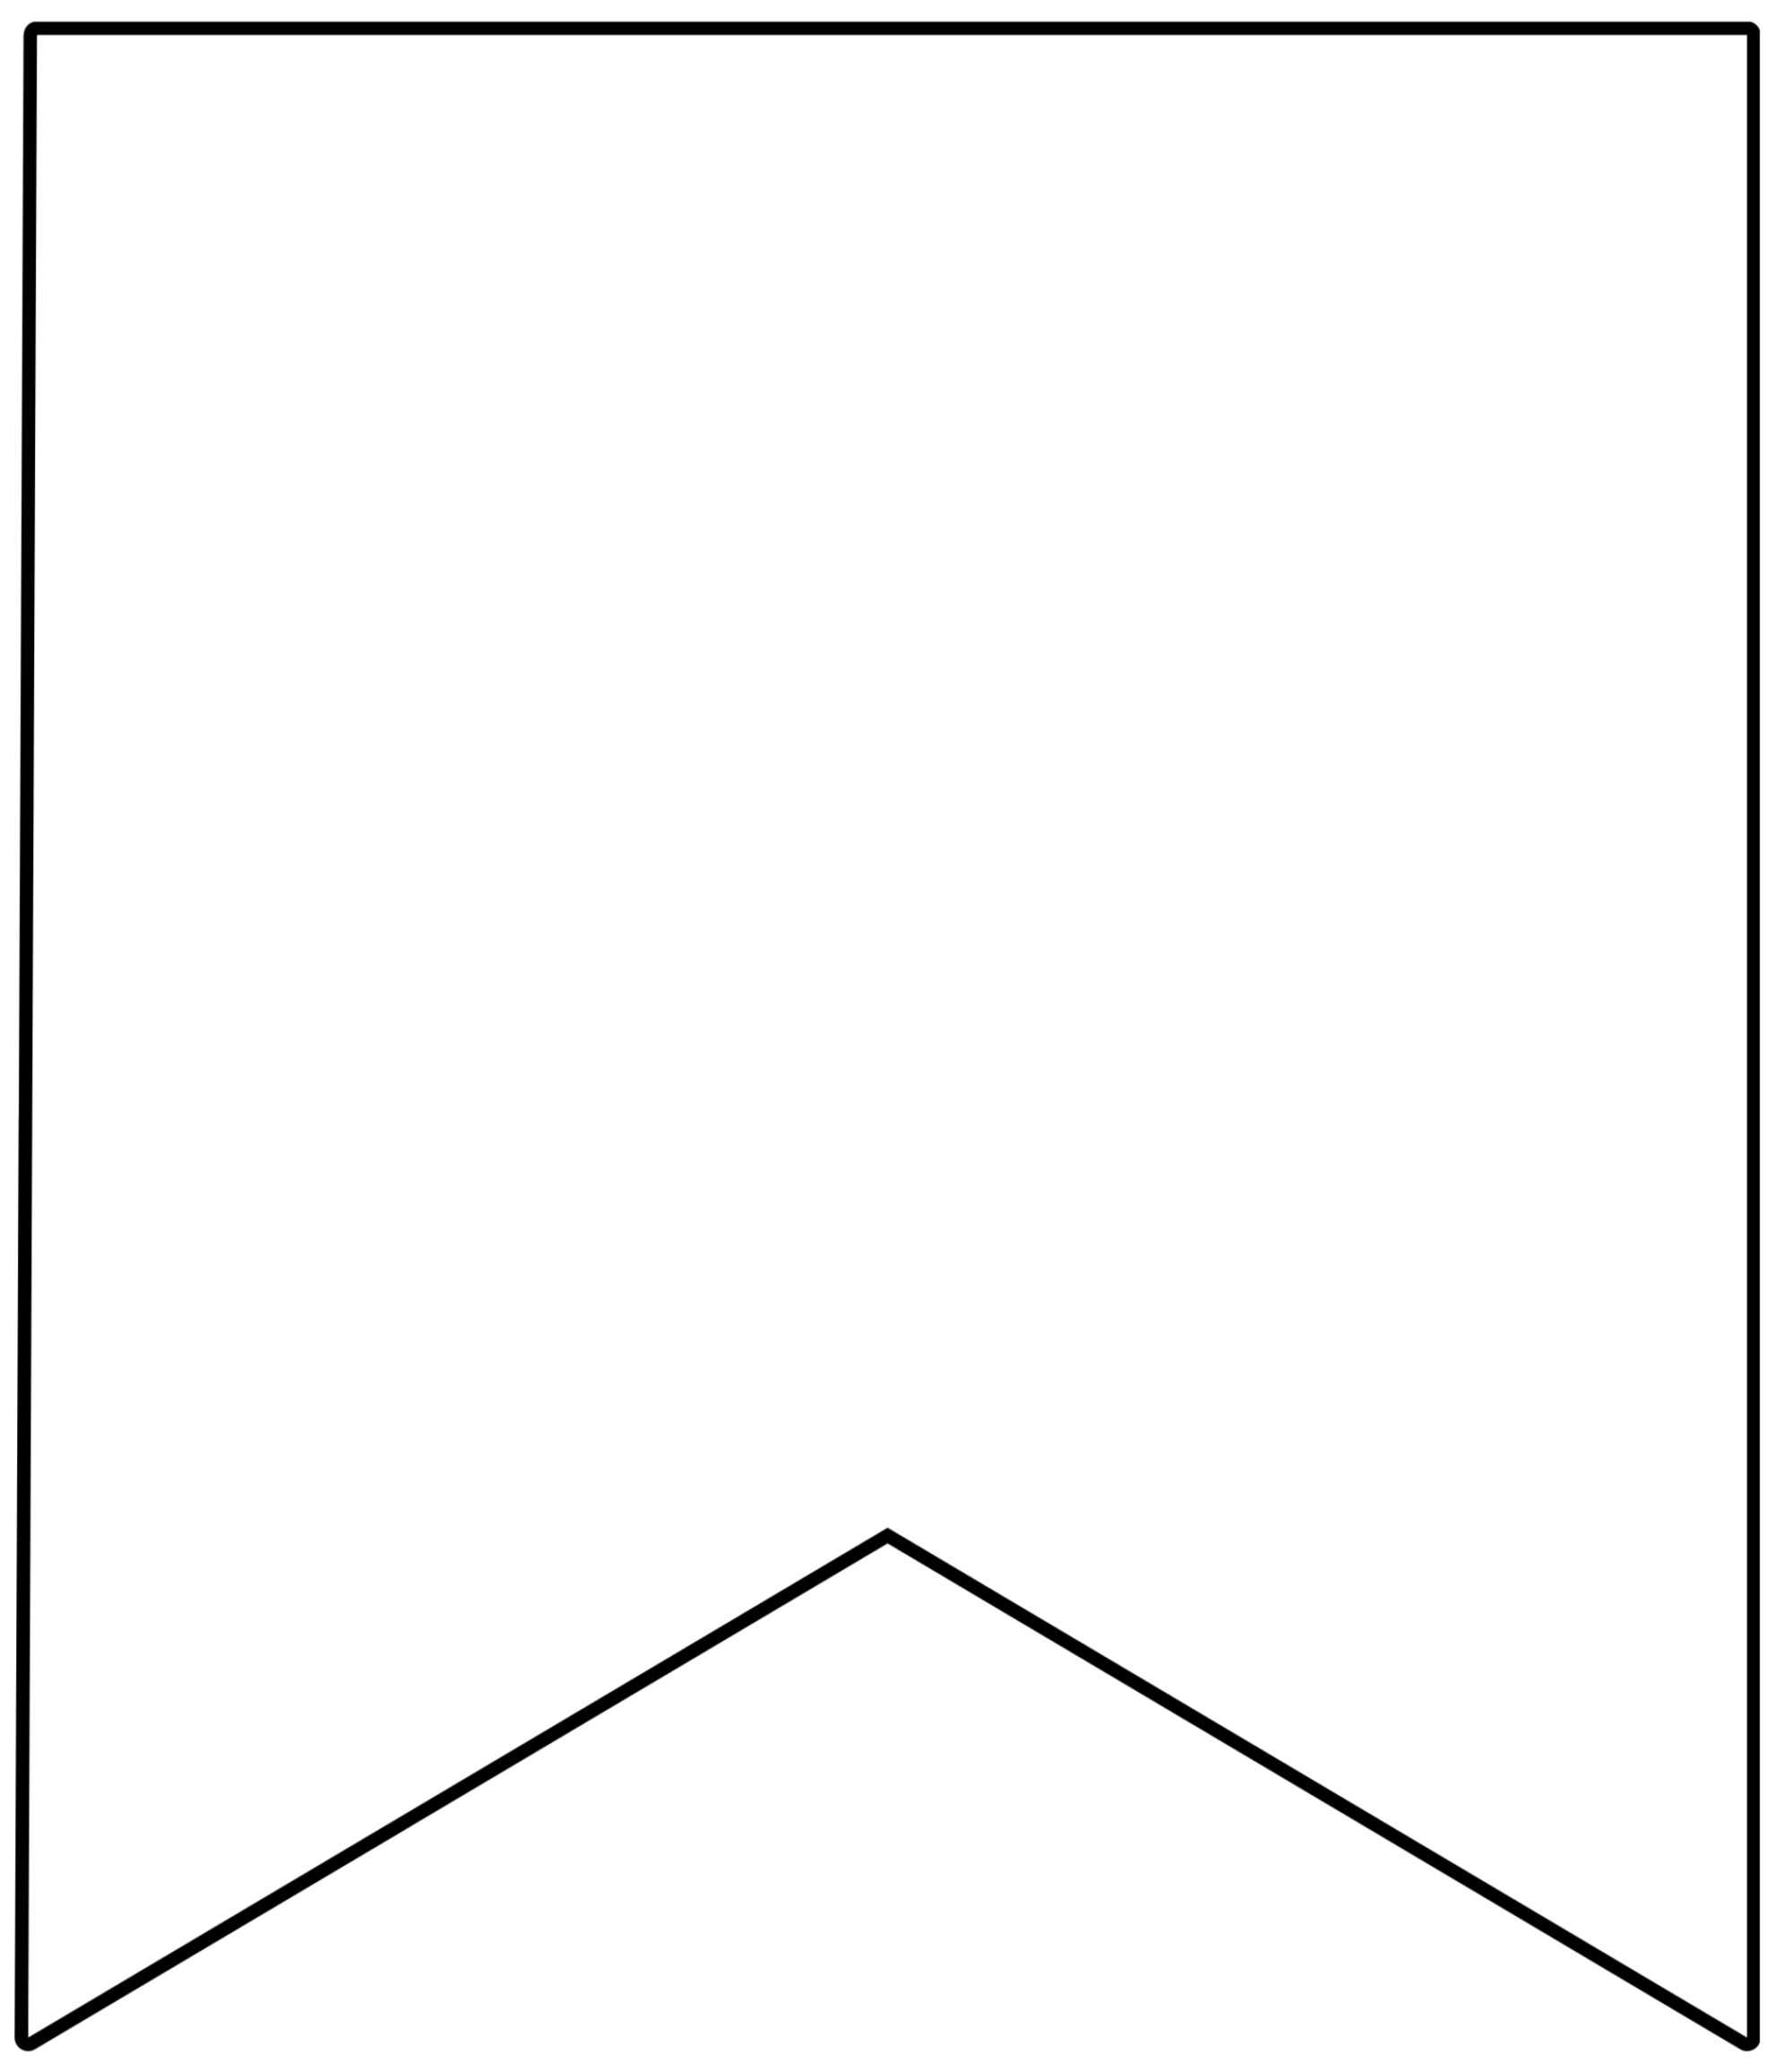 Free Printable Banner Templates {Blank Banners} - Paper Within Free Triangle Banner Template